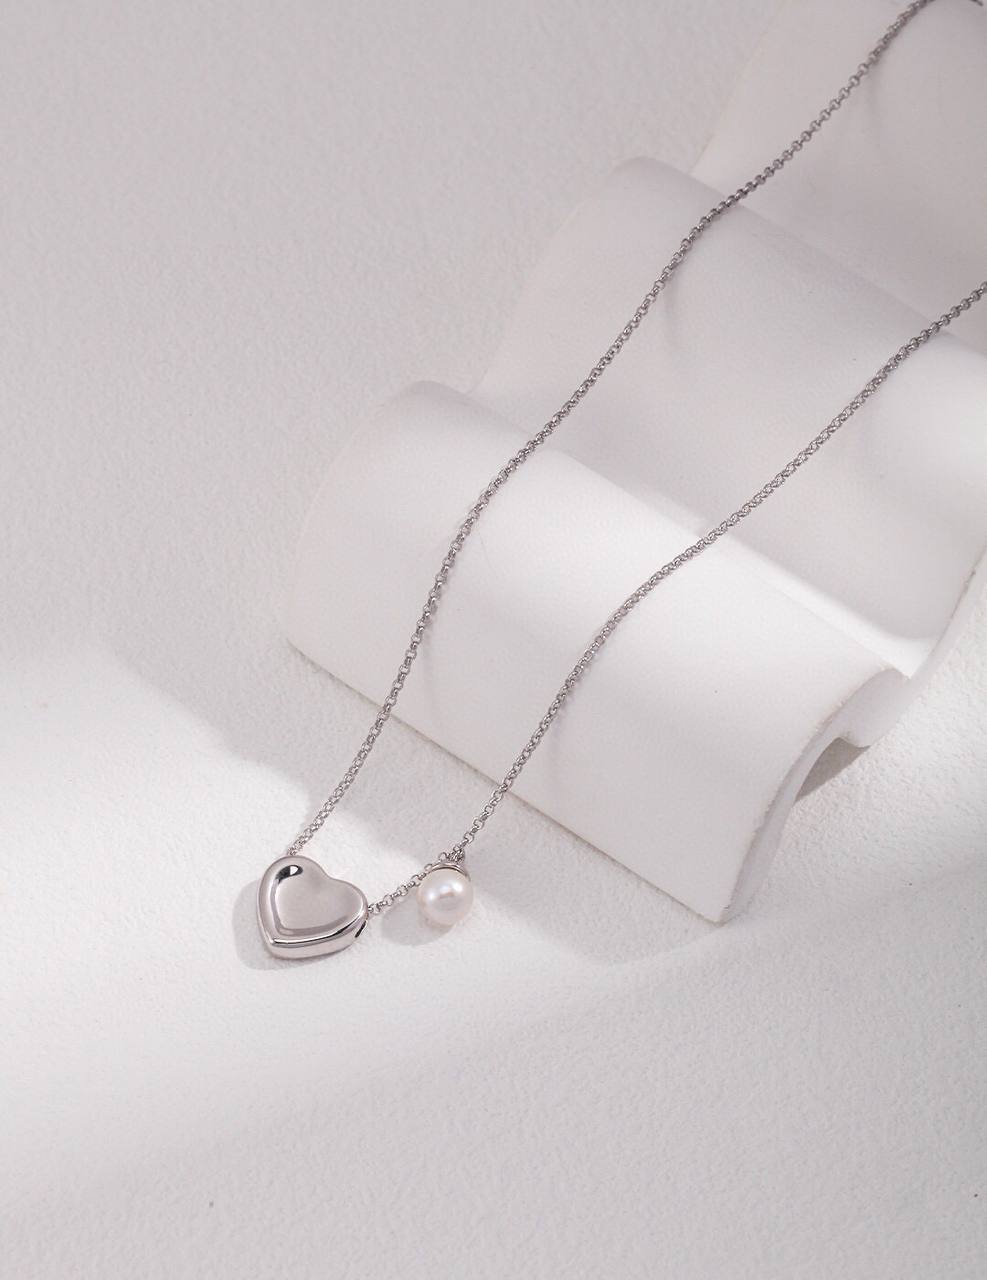 Heart-shaped Sterling Silver Pearl Necklace